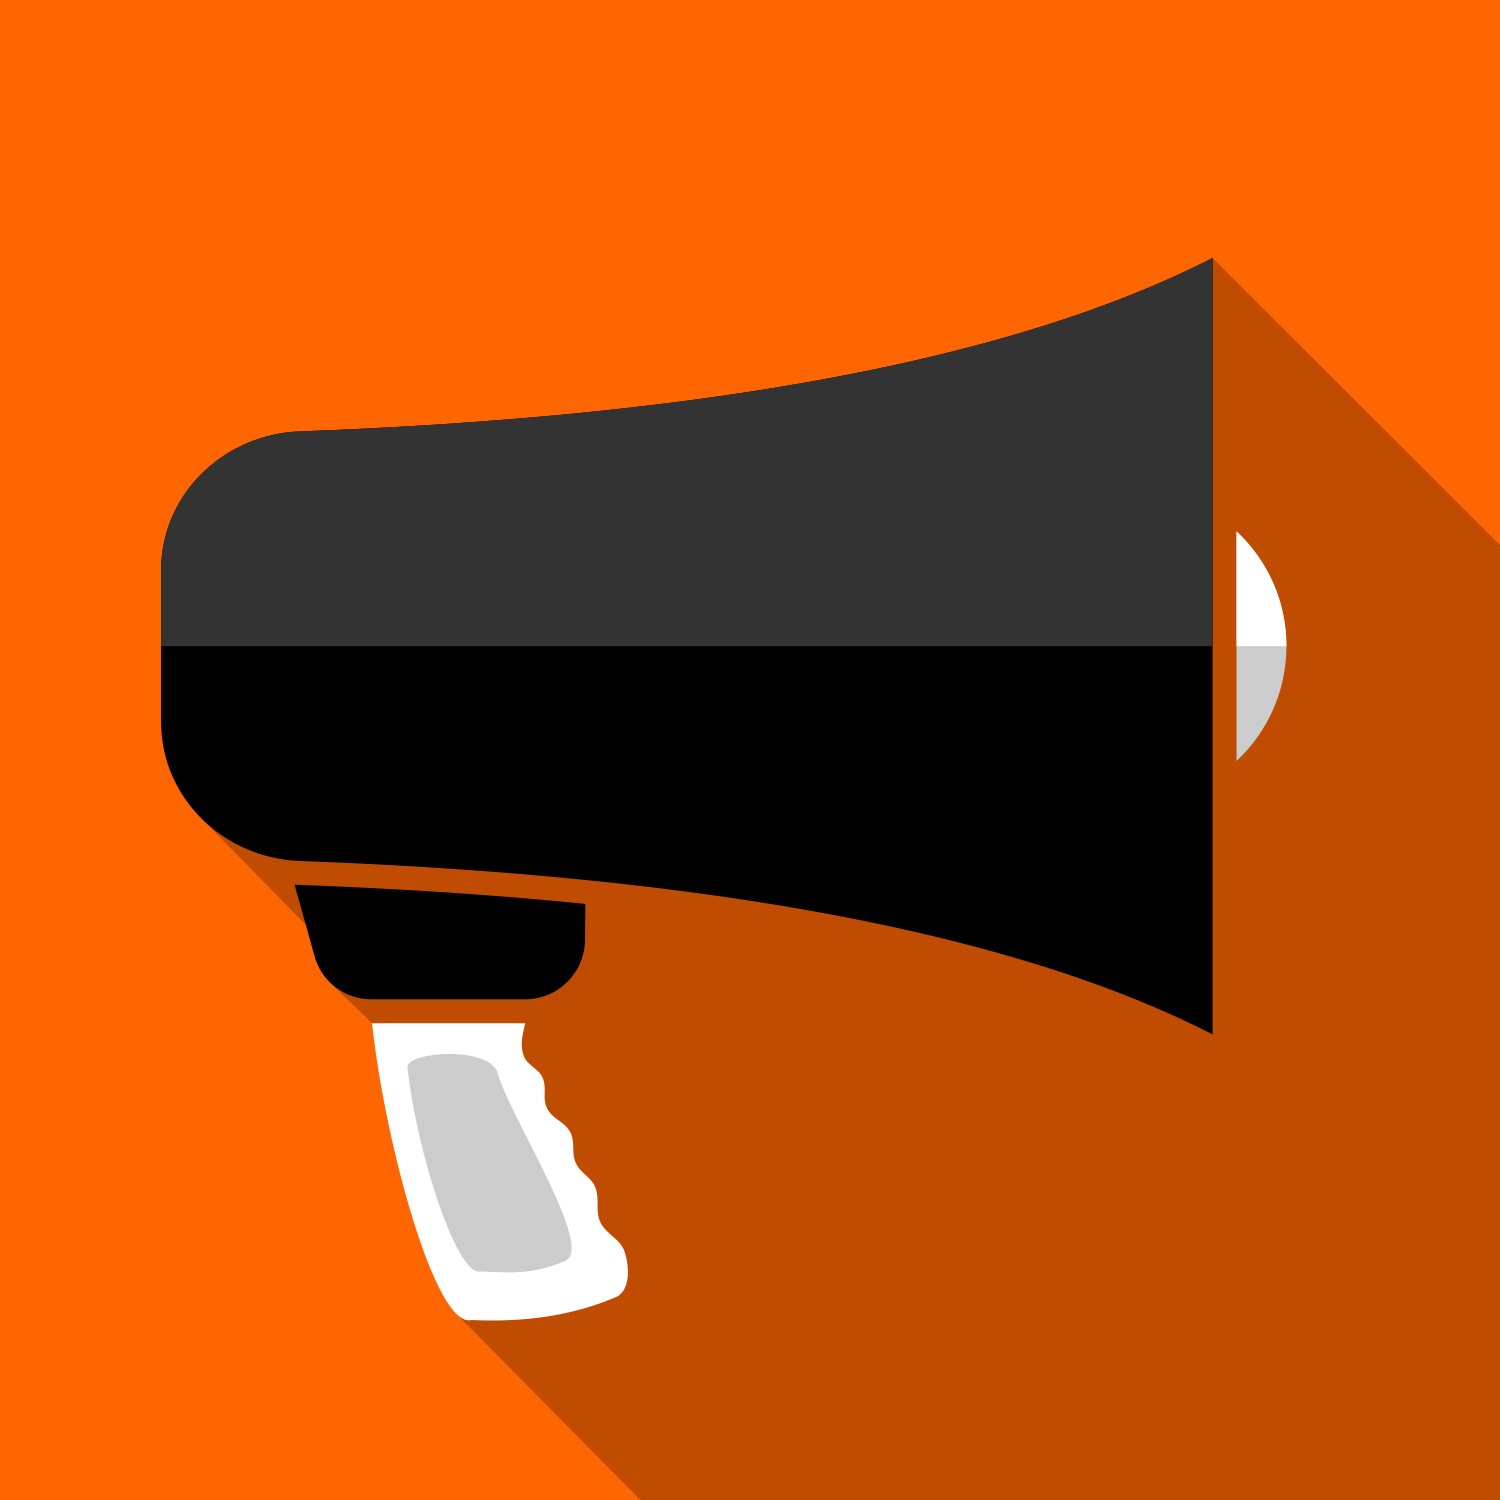 Vector for free use: Megaphone icon